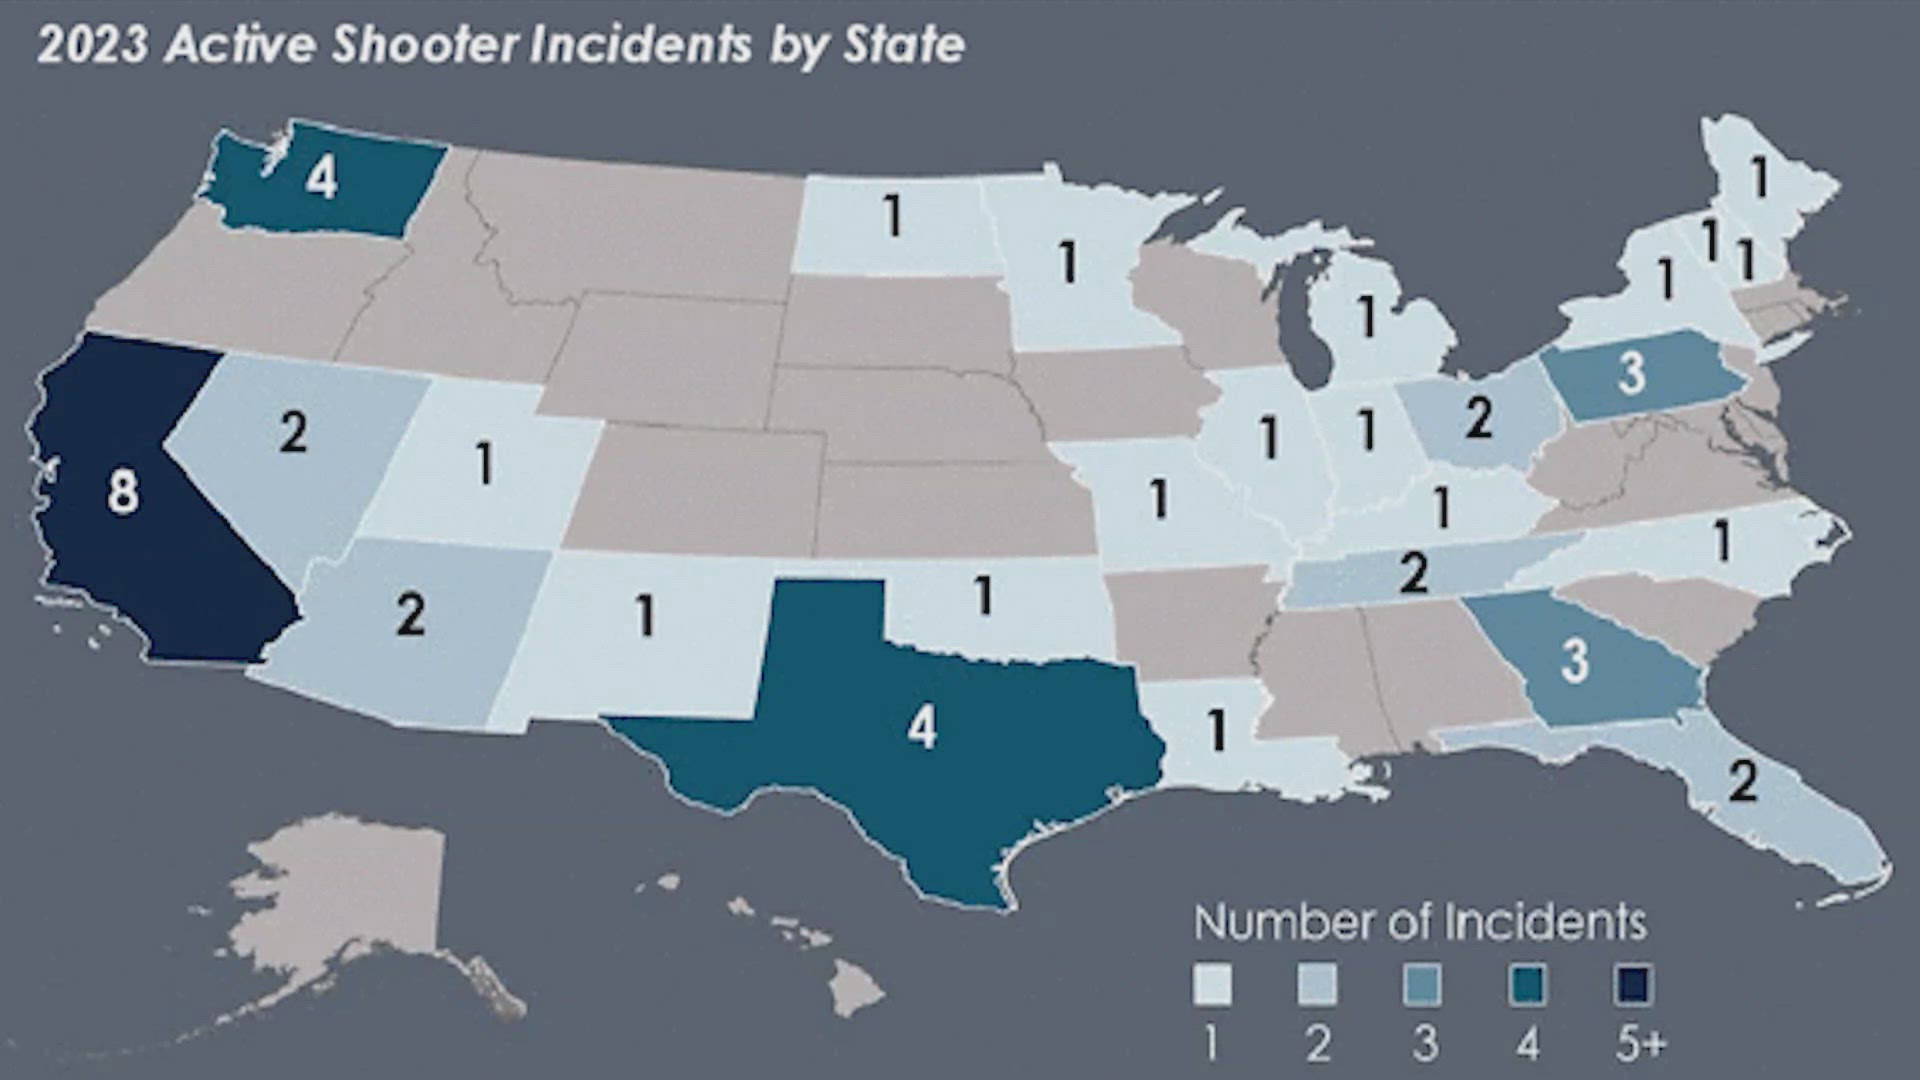 In 2023, the U.S. saw 48 of these incidents, with four taking place in Washington state, resulting in 12 deaths.